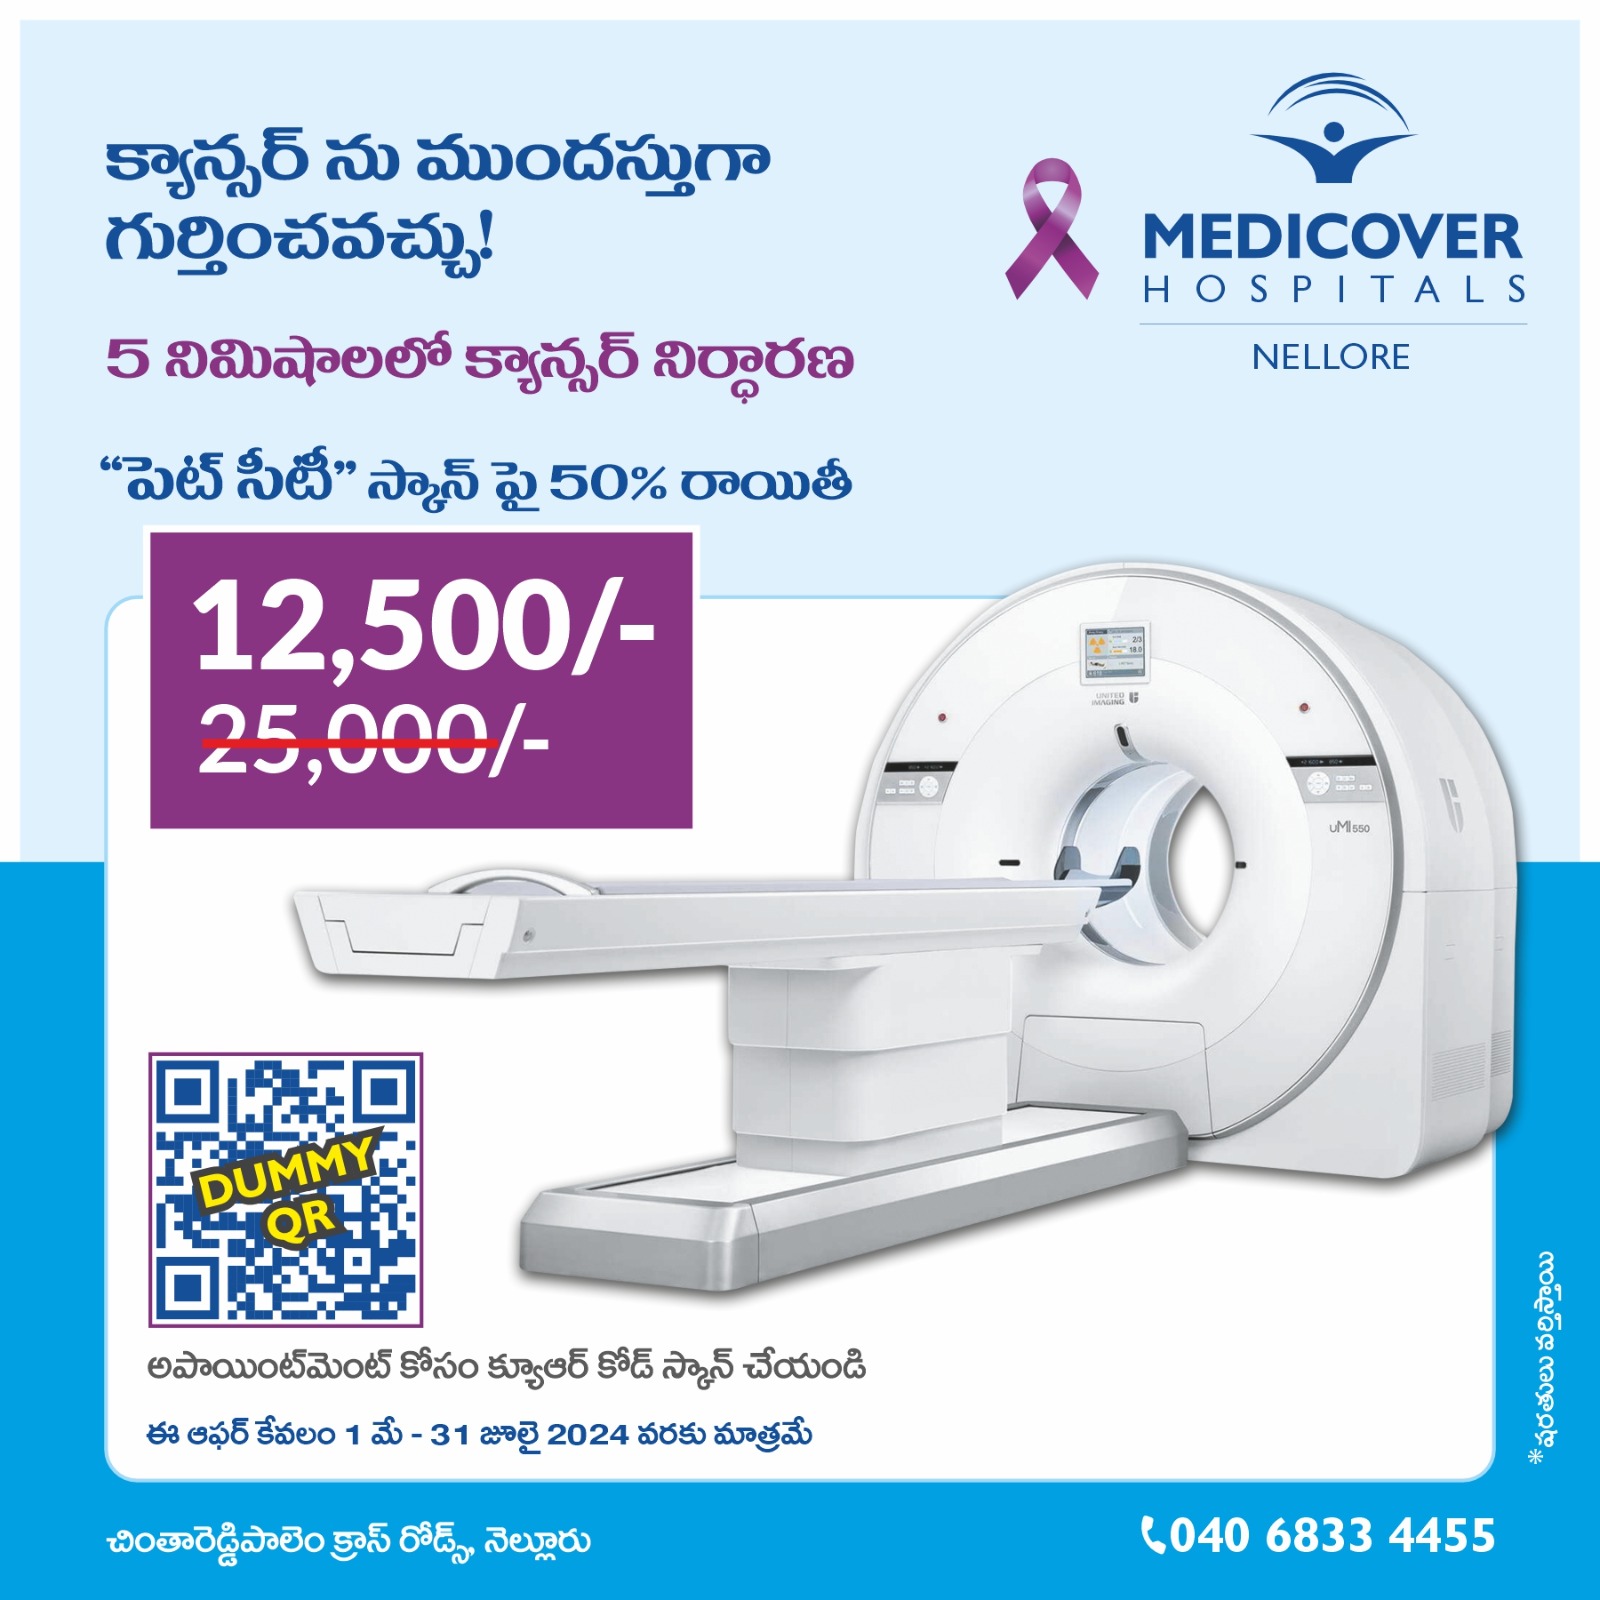 50% Offer On PET-CT Scan